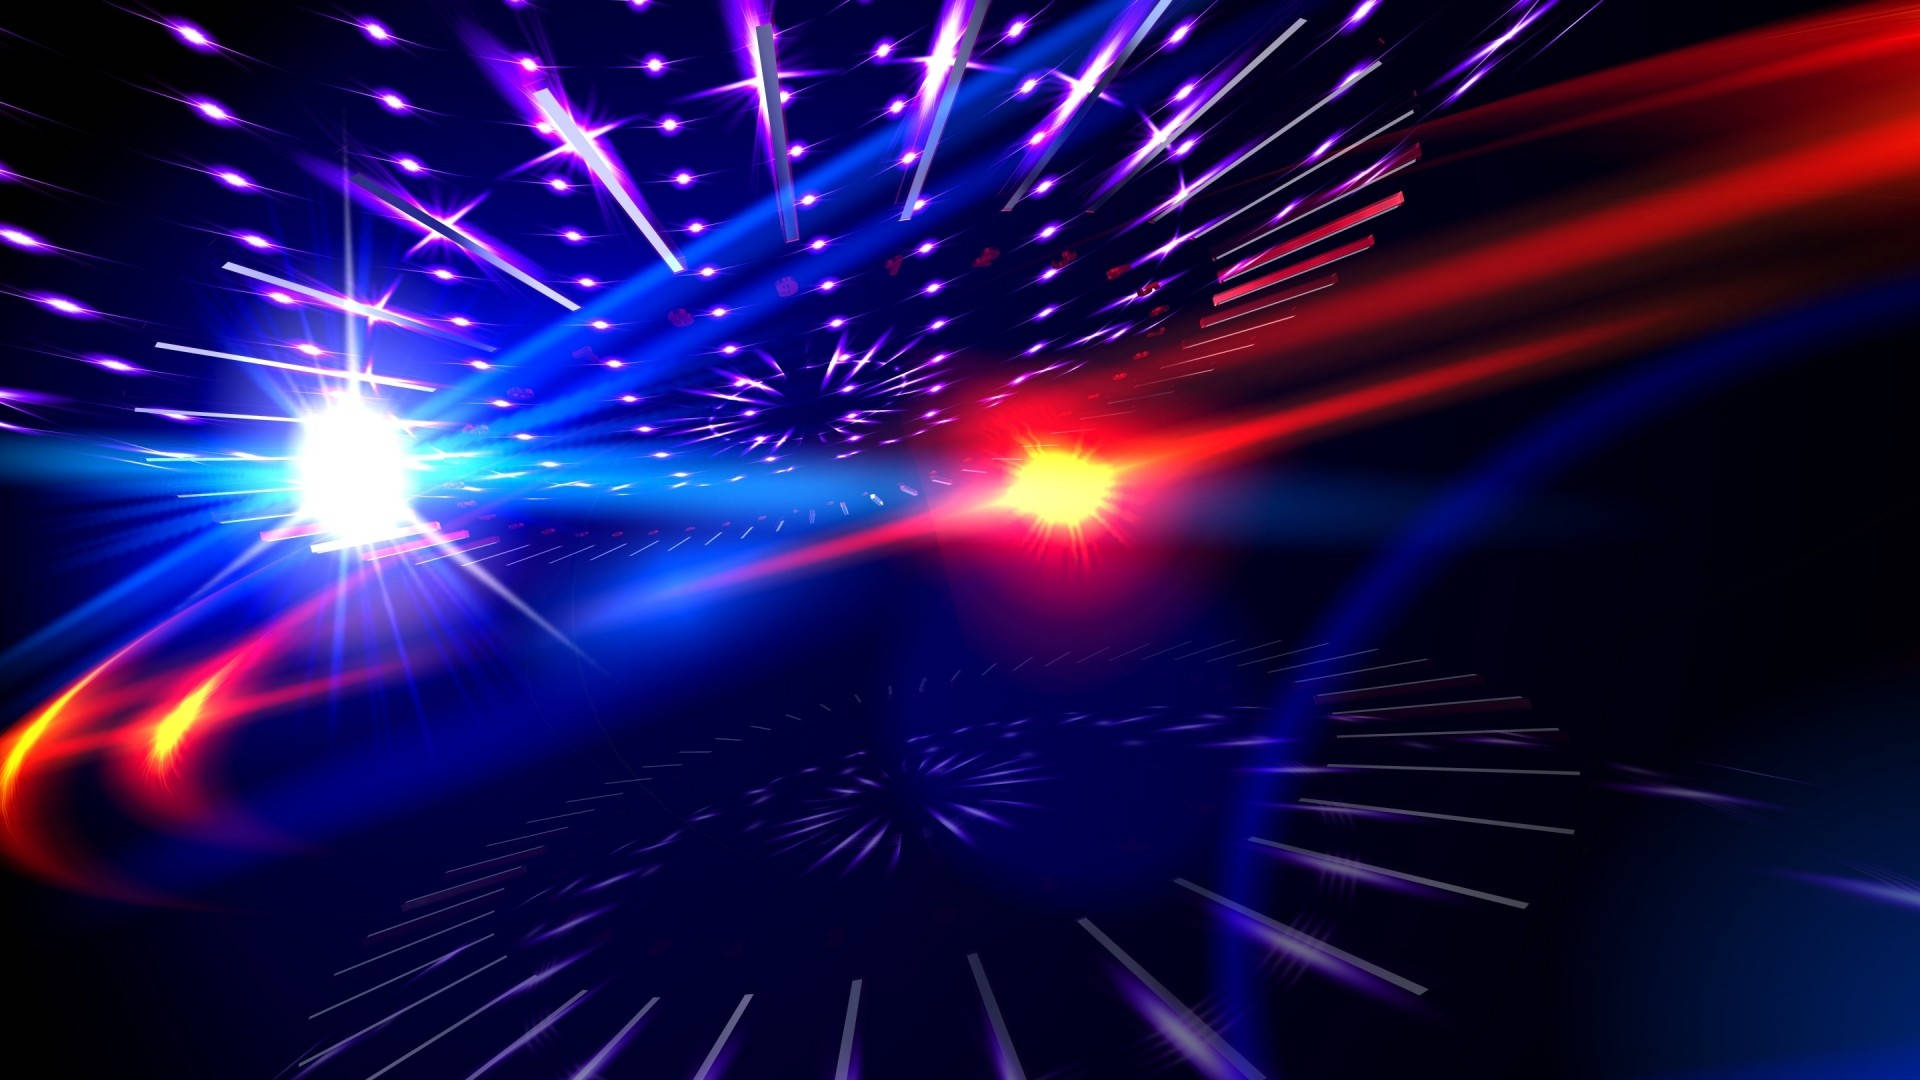 Blue And Red Lights Flare 1080p Hd Desktop Background